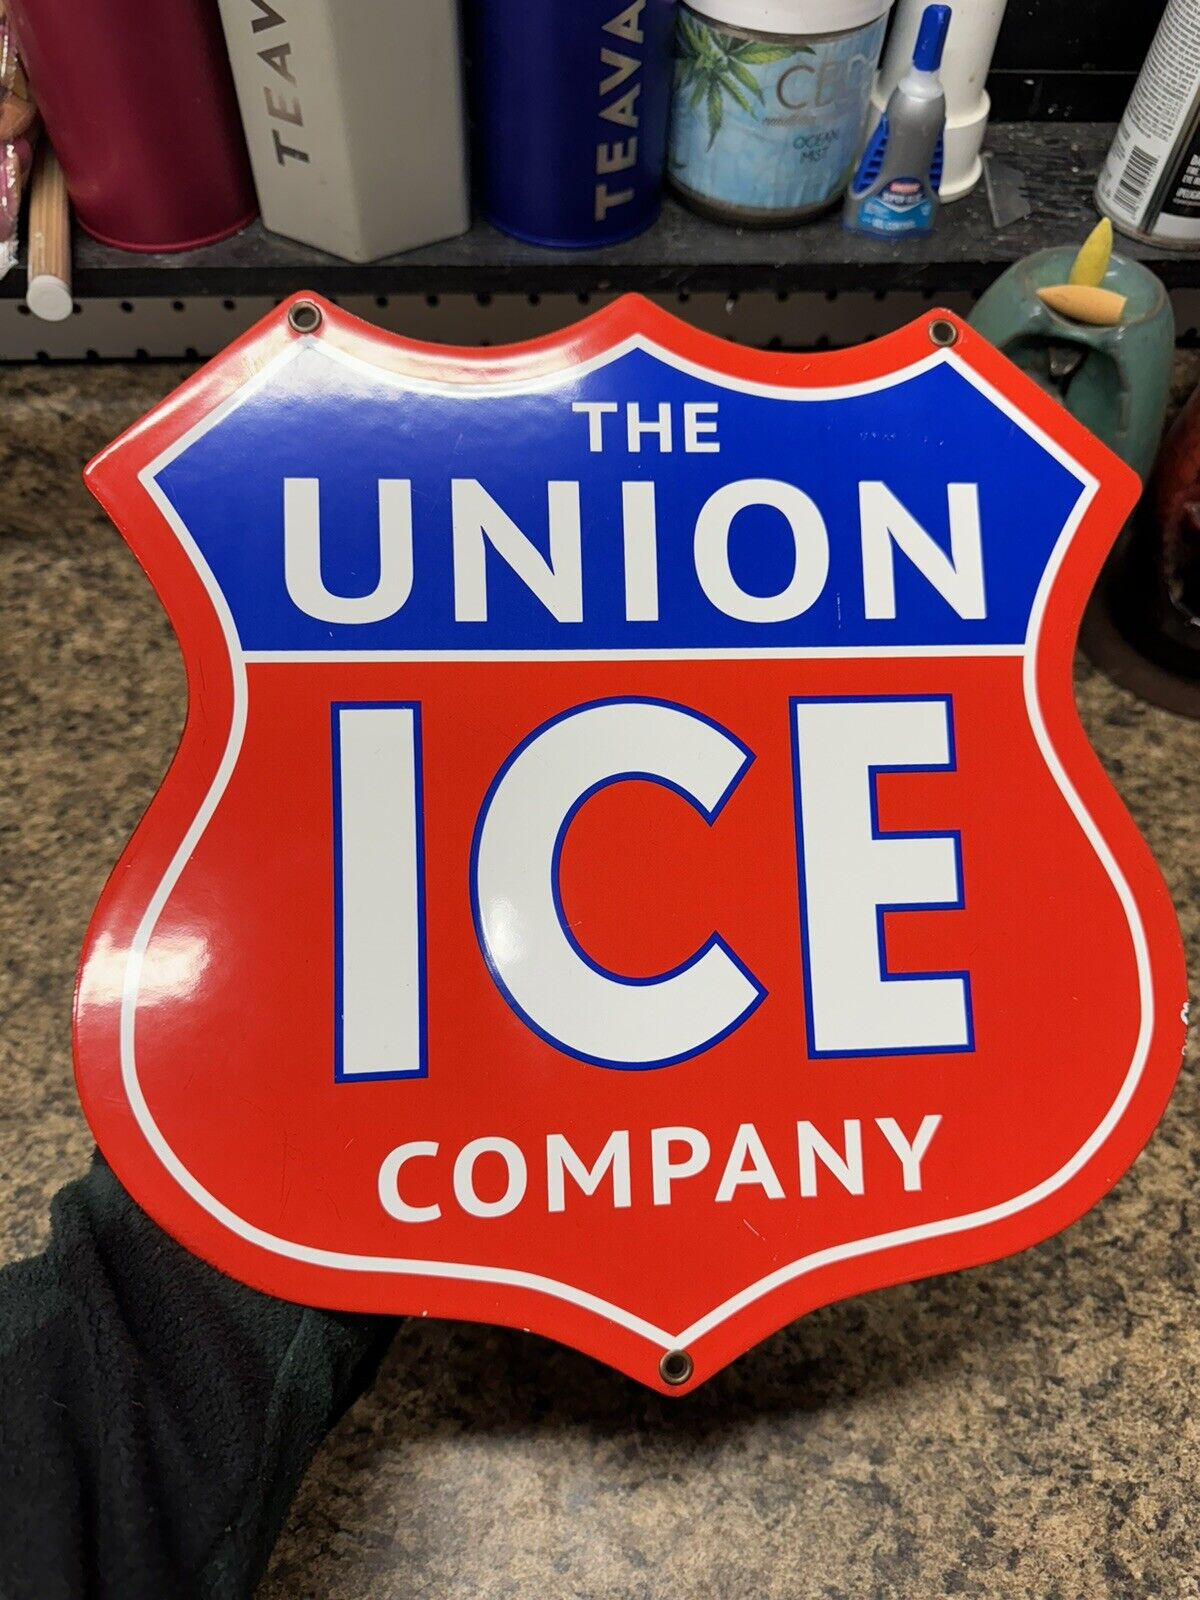 UNION ICE COMPANY PORCELAIN STEEL SIGN TRUCK DELIVERY DRINK SODA POP